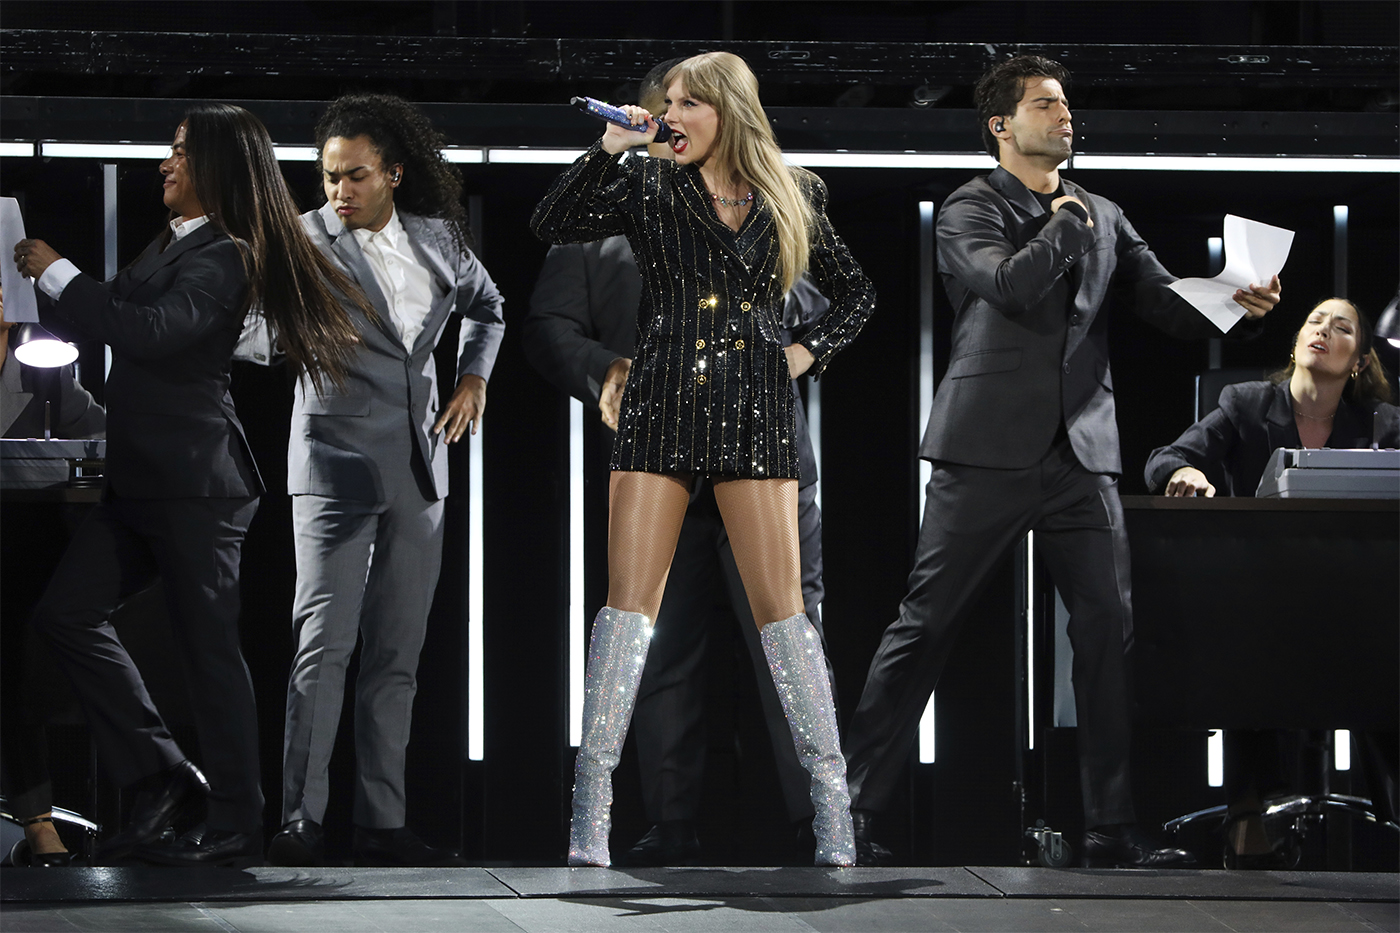 Taylor Swift 'Era's Tour' Film Will Be a Lesson for All Music Artists